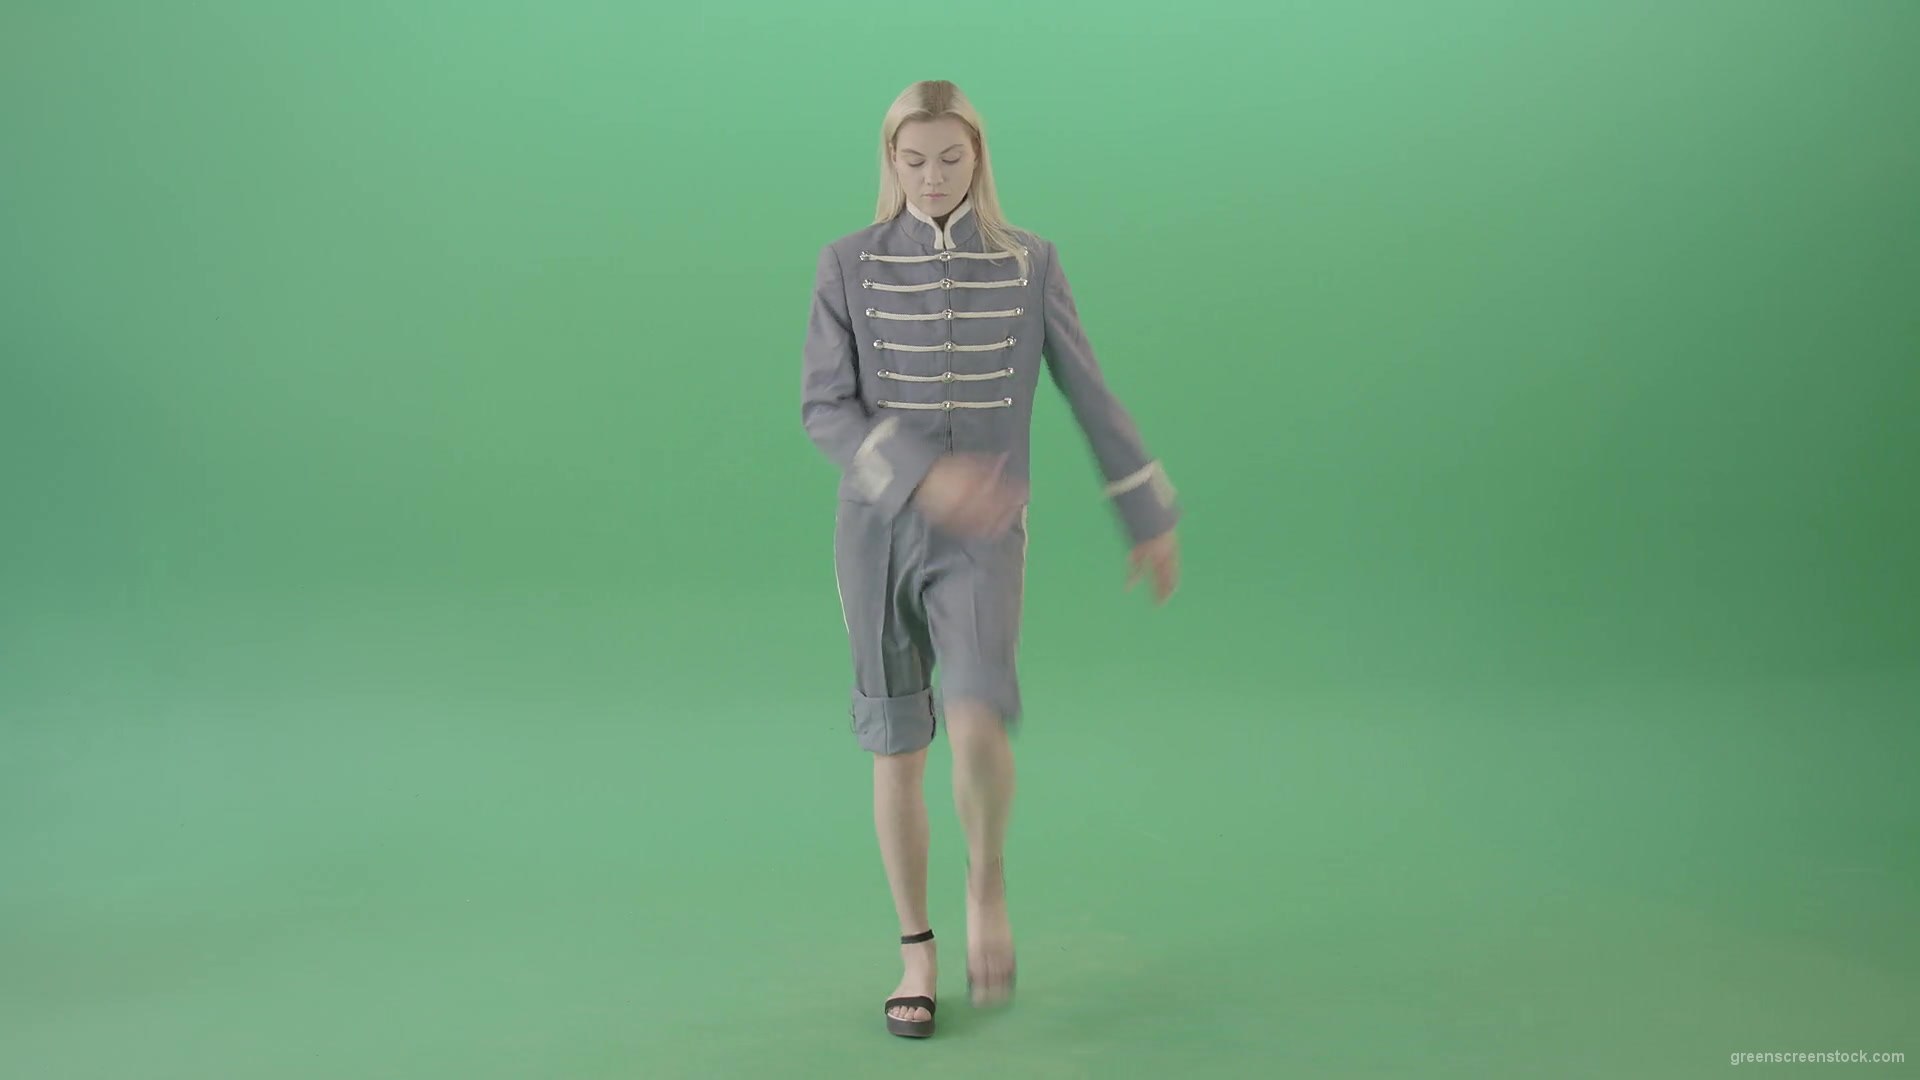 Blonde-Woman-in-blue-military-royal-empire-uniform-marching-on-green-screen-4K-Video-Footage-1920_008 Green Screen Stock